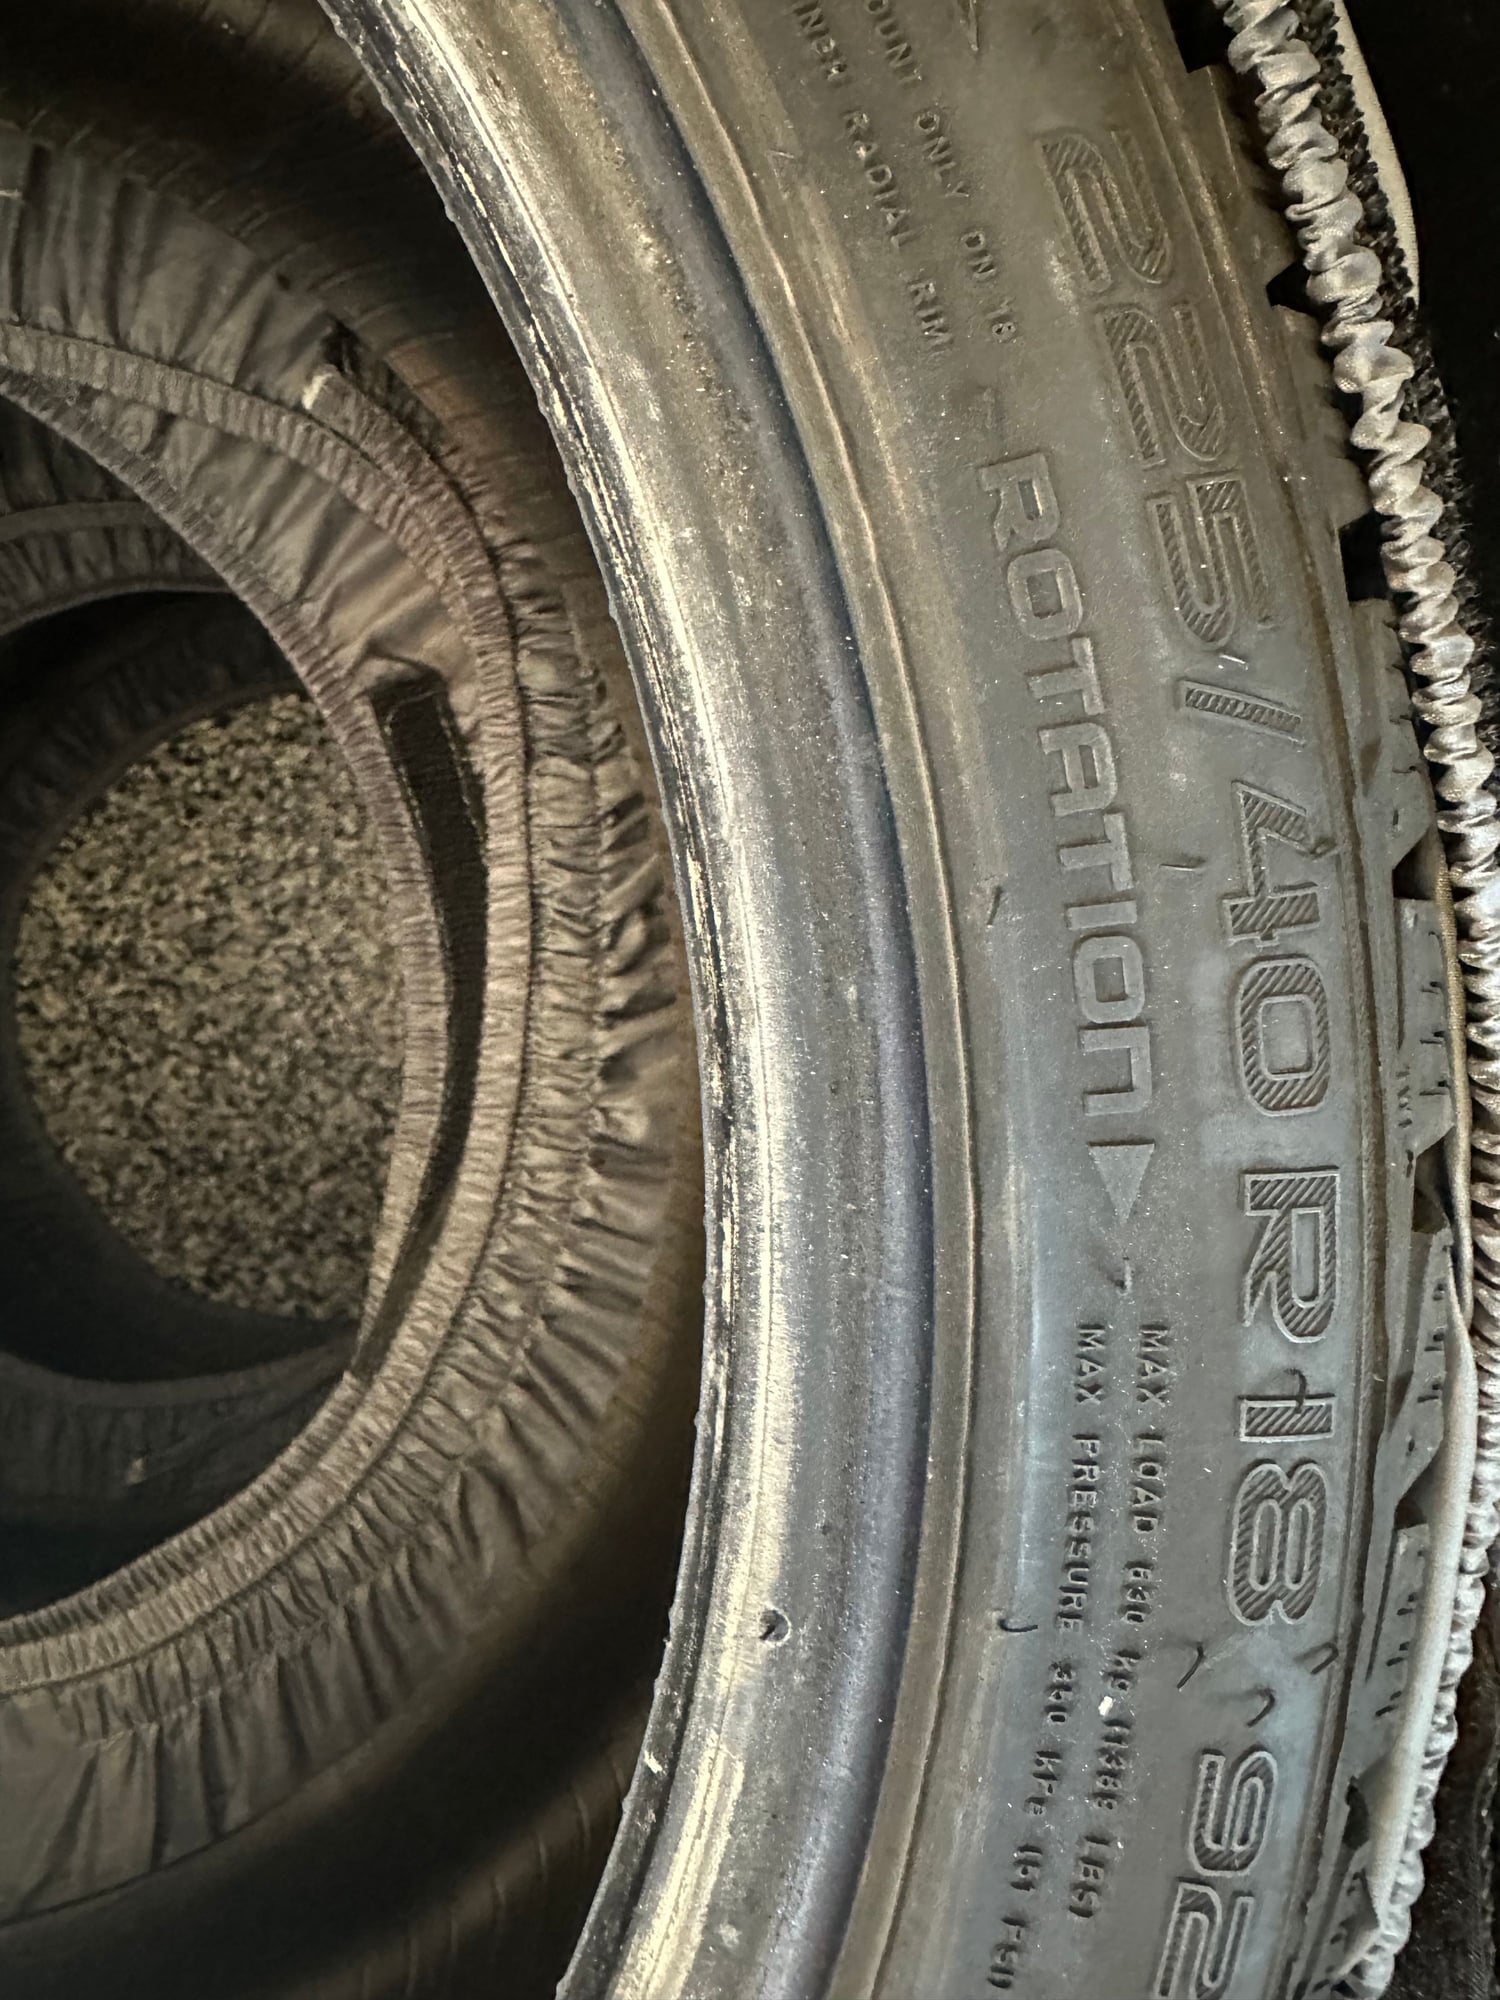 Wheels and Tires/Axles - 2IS Winter Tires - Nokian Hakkapeliitta r2 Set of 4 tires - Used - 2008 to 2013 Lexus IS350 - Mason, OH 45040, United States